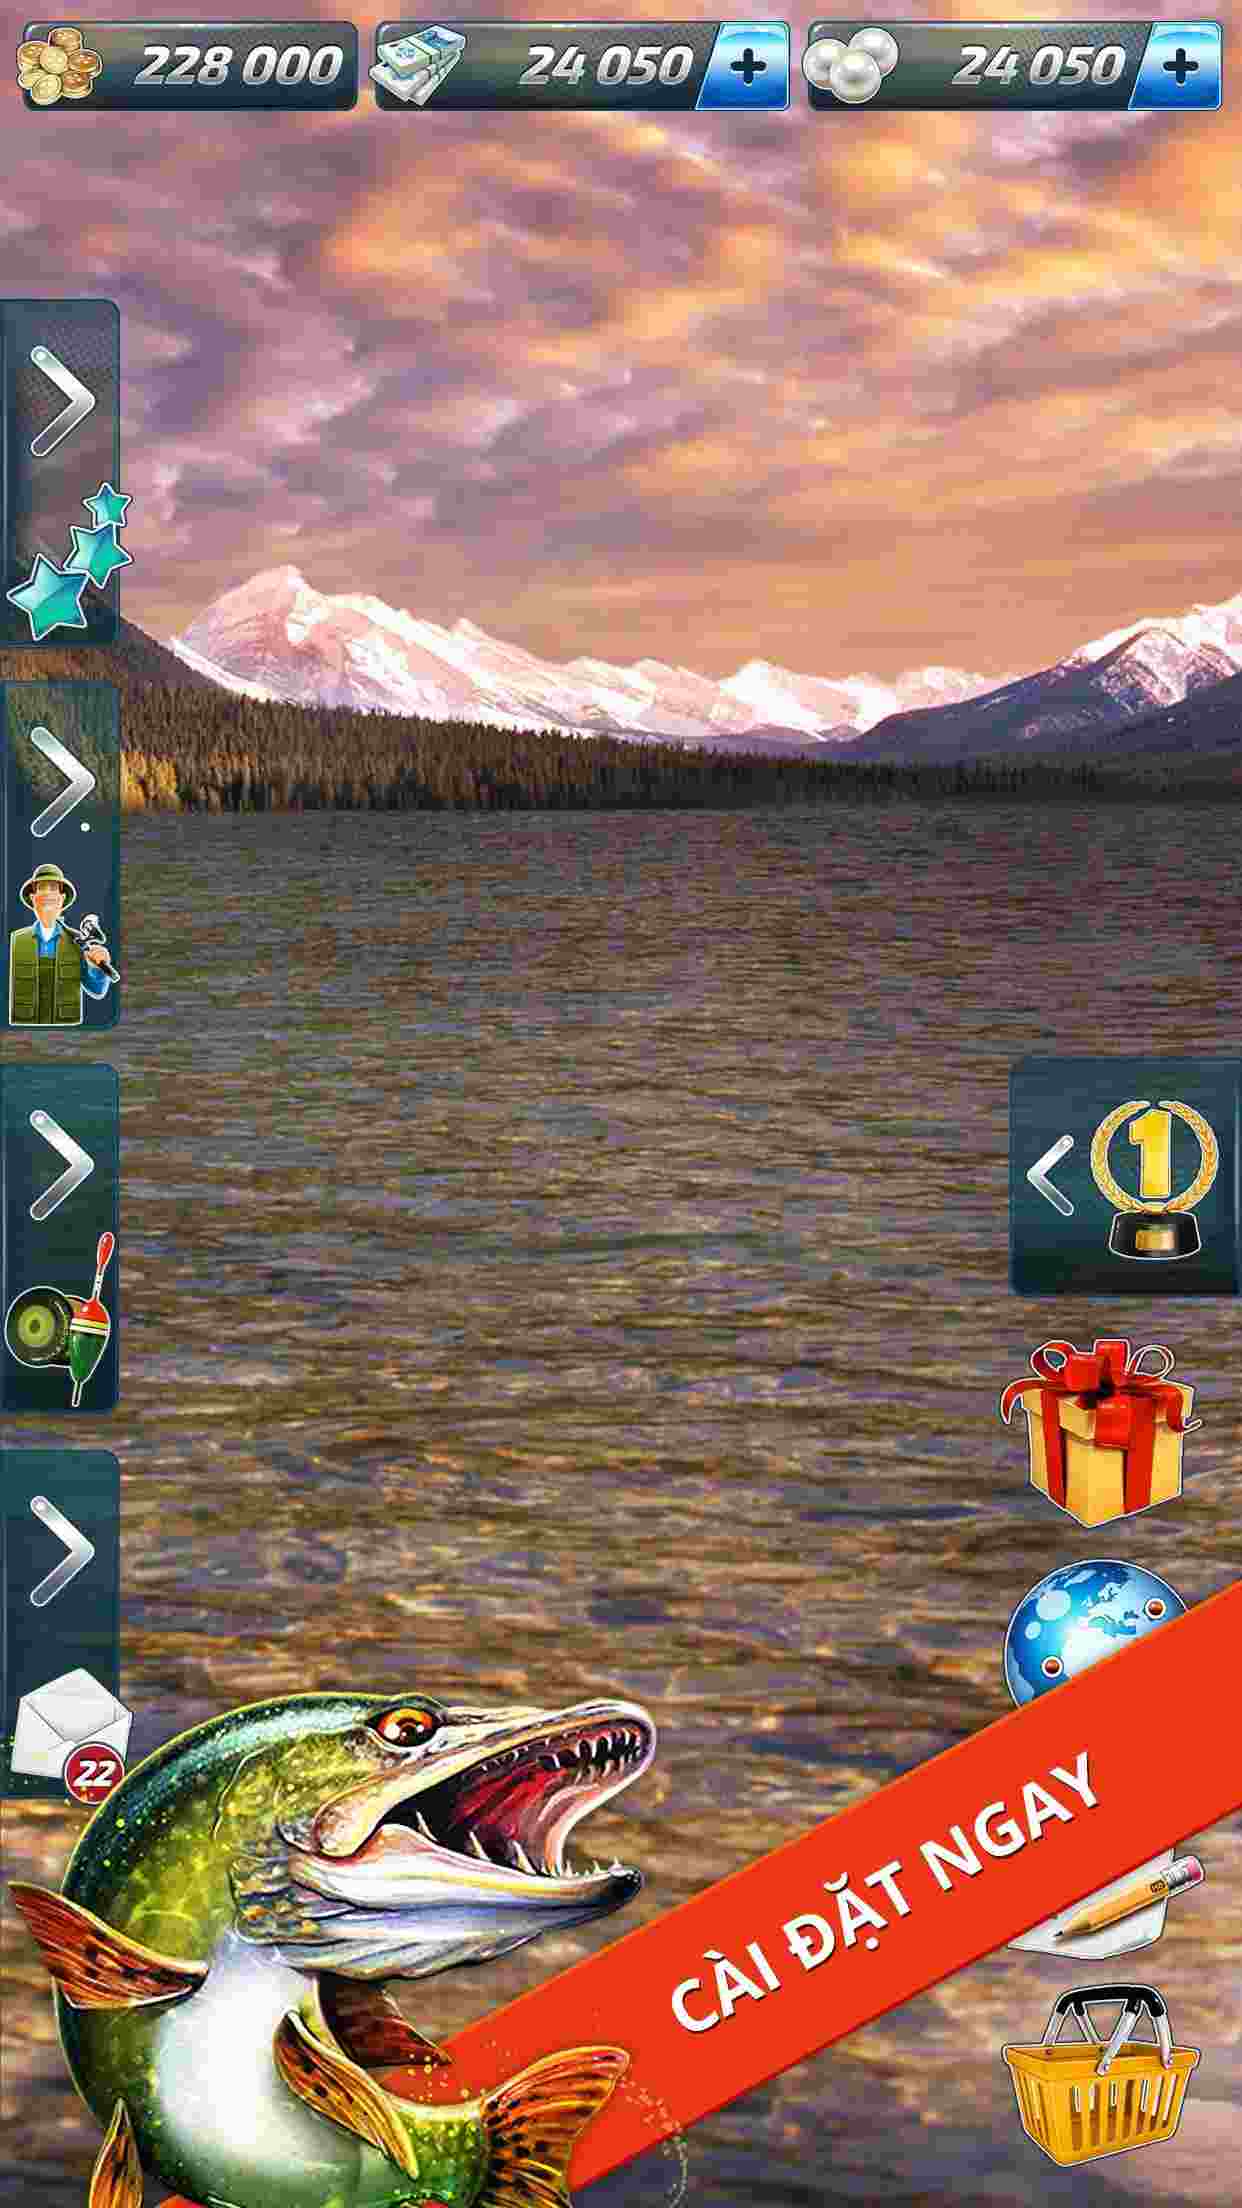 game Let's Fish mod apk cho android